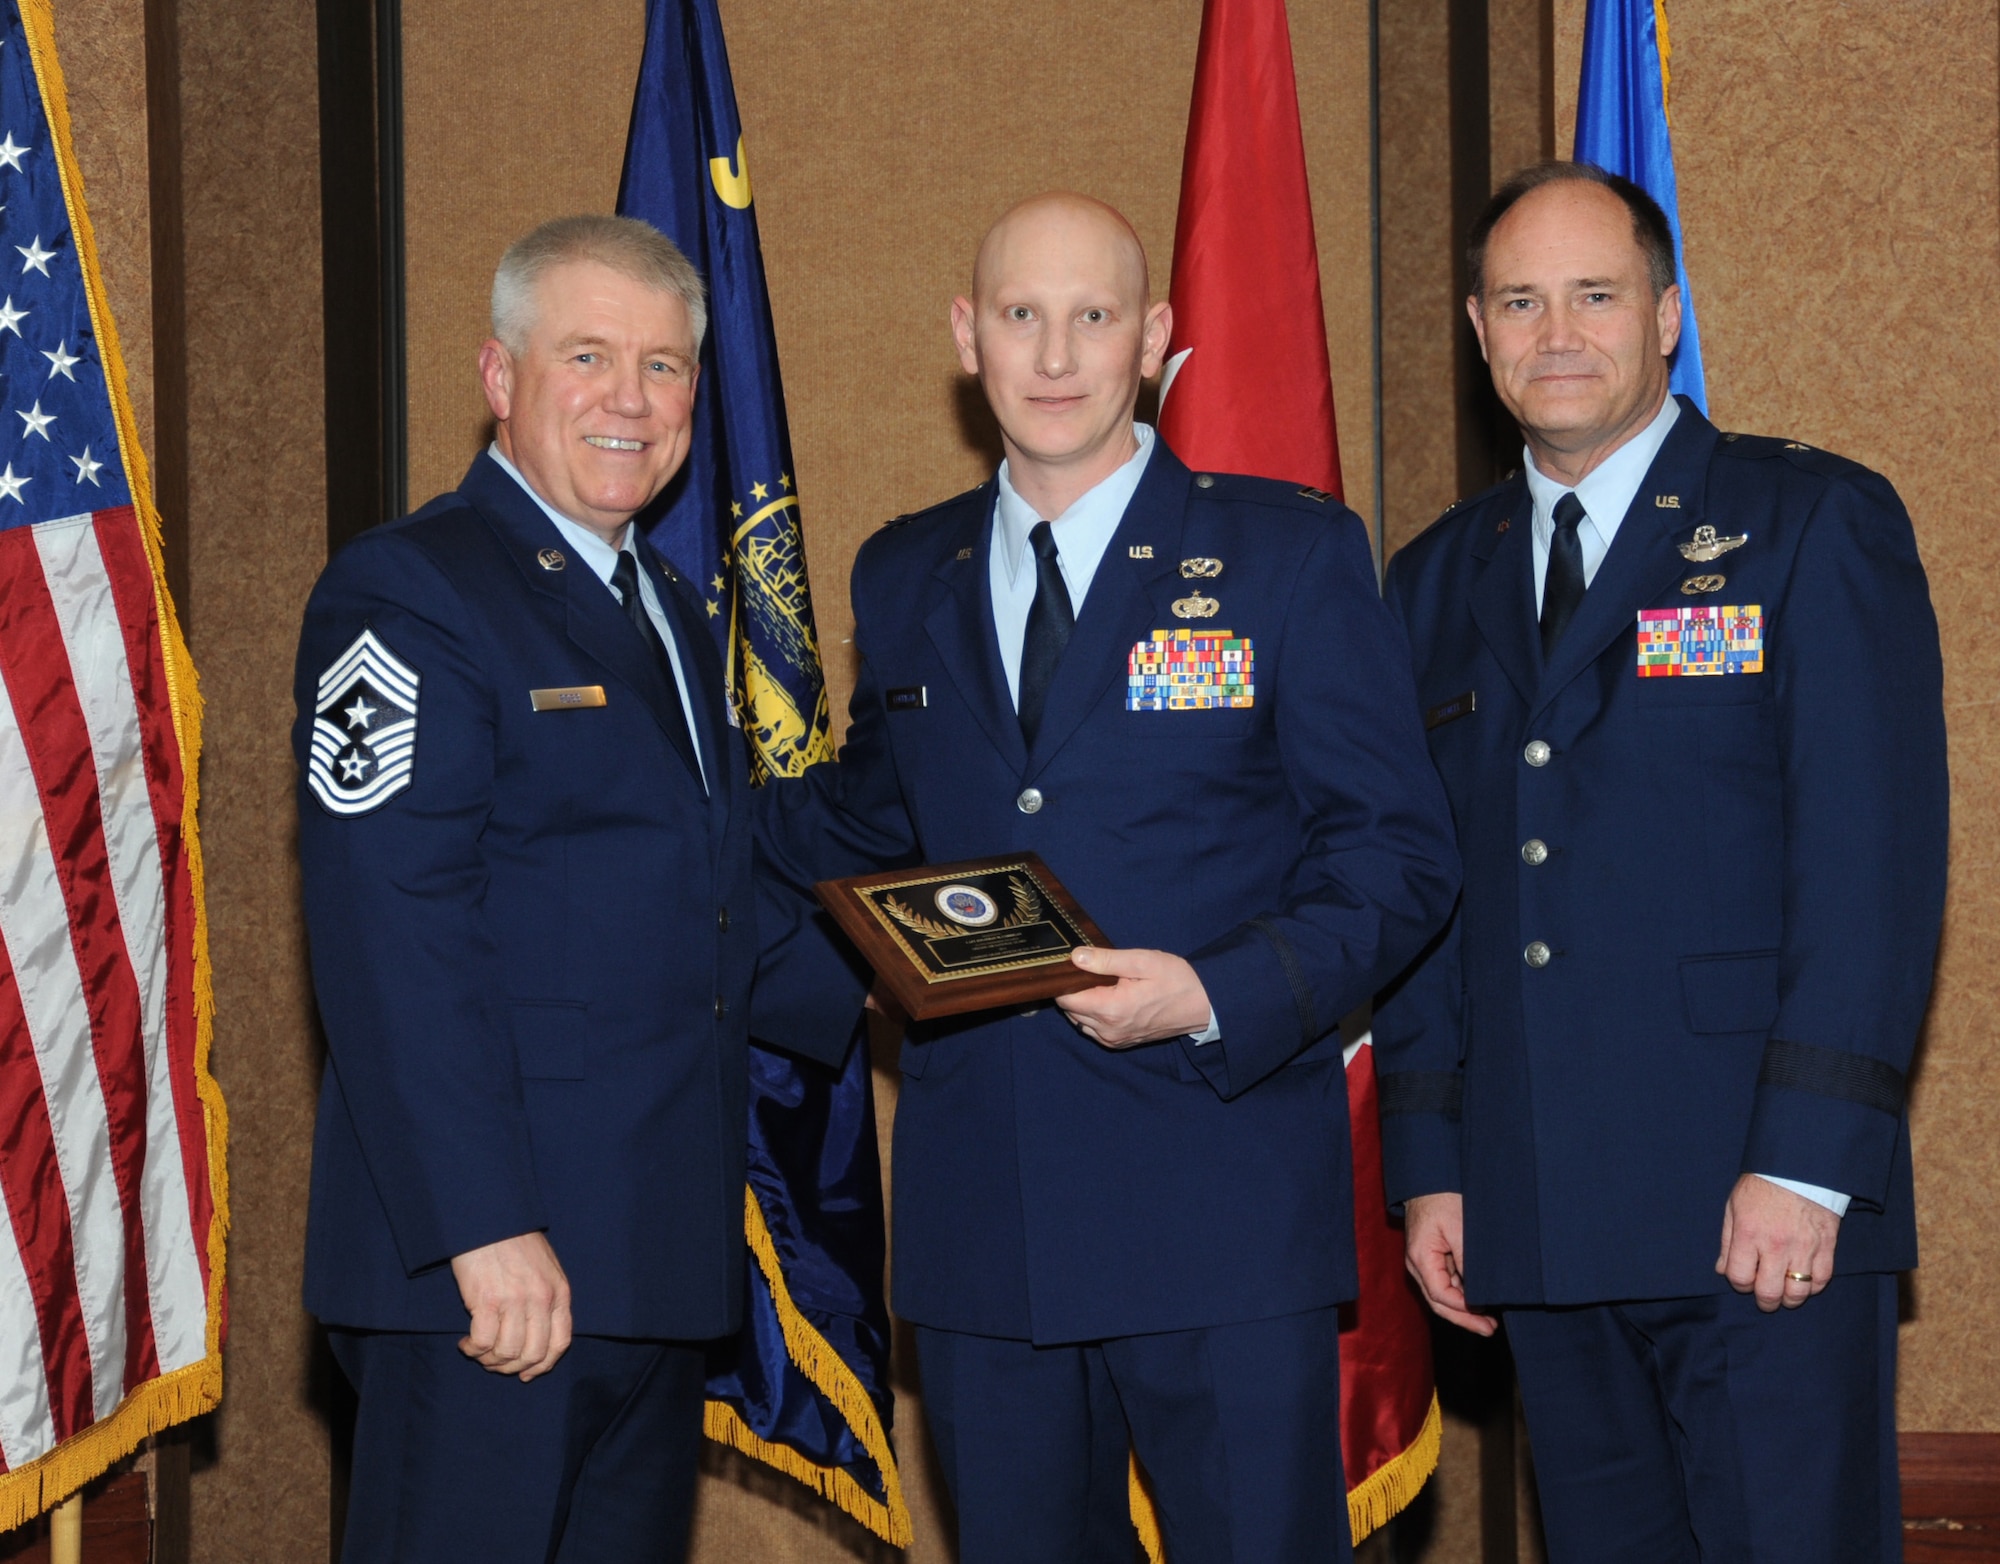 Oregon Air National Guard Capt. Jonathan Corrigan, assigned to the 142nd Civil Engineer Squadron, center, is presented with the overall Oregon Air National Guard Outstanding Company Grade Officer of the Year Award, from 173rd Fighter Wing Command Chief Master Sgt. Danny Ross, left, and Air Component Commander Brig. Gen. Michael Stencel, right, during the 21st Annual Oregon Air National Guard Awards Banquet, March 14, 2015, Portland, Ore. (U.S. Air National Guard photo by Tech. Sgt. Emily Thompson, 142nd Fighter Wing Public Affairs/Released)